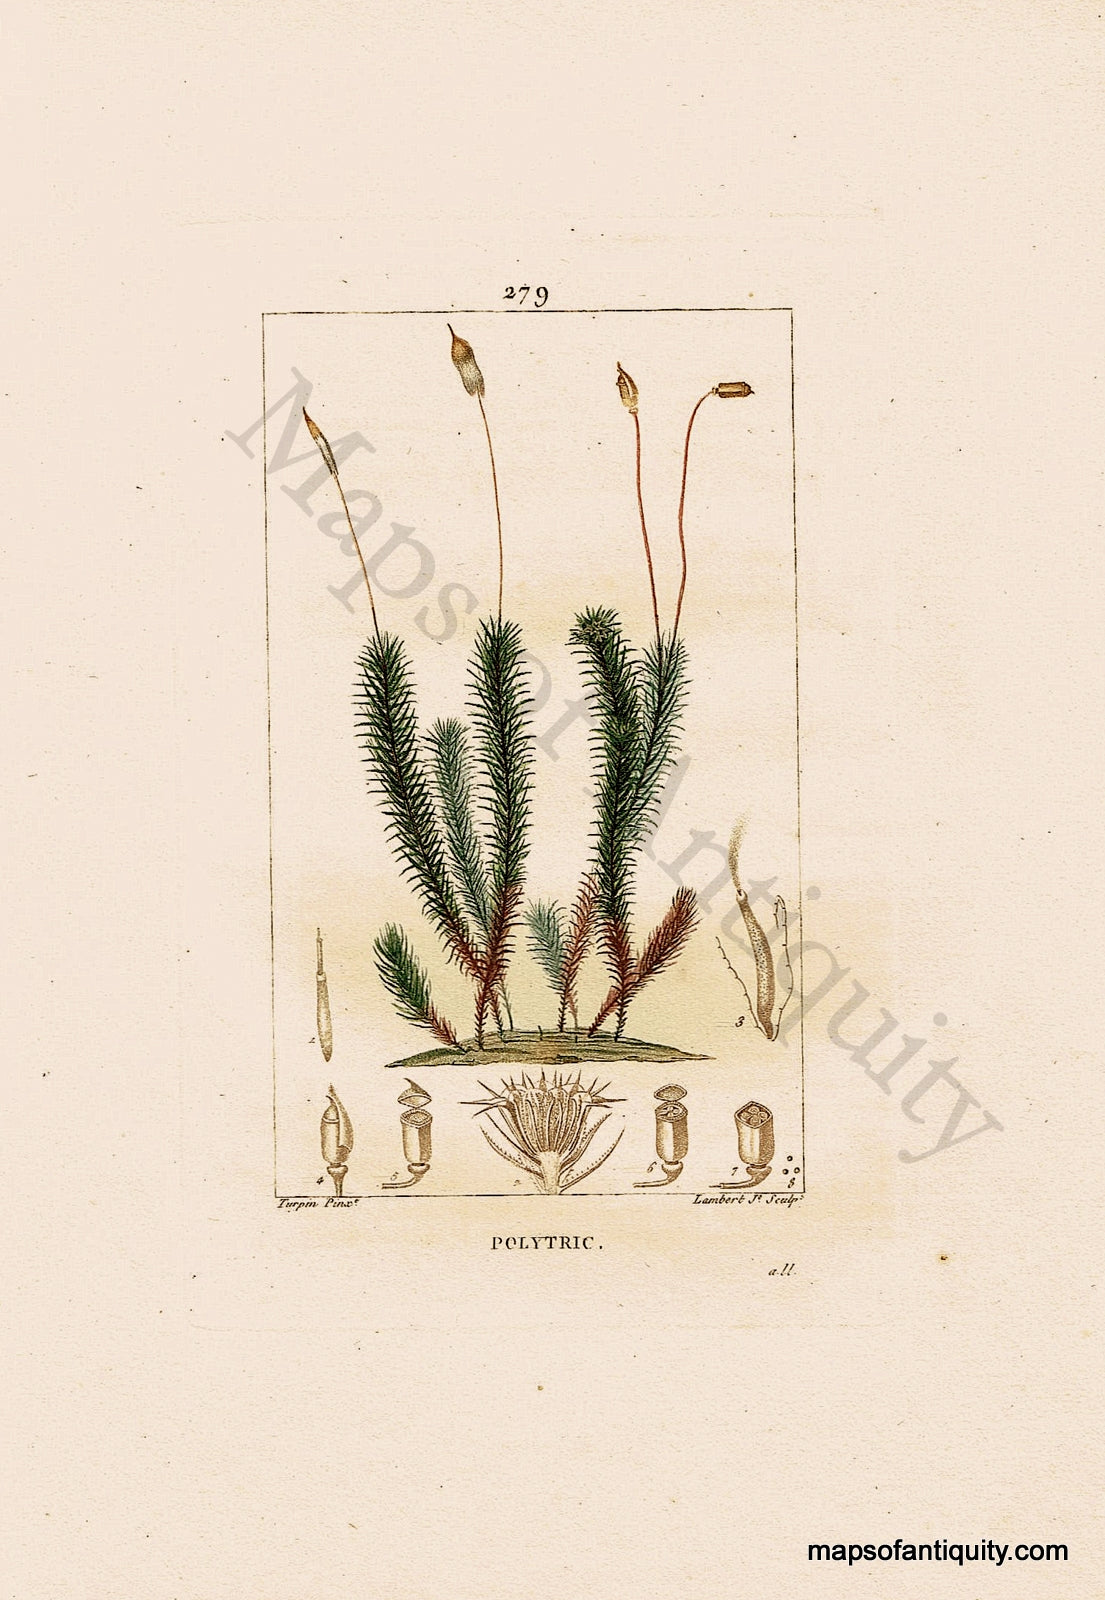 Hand-Colored-Antique-Engraving-Polytric---Polytrichum-Natural-History-Prints-Botancial-1840-Lambert-Maps-Of-Antiquity